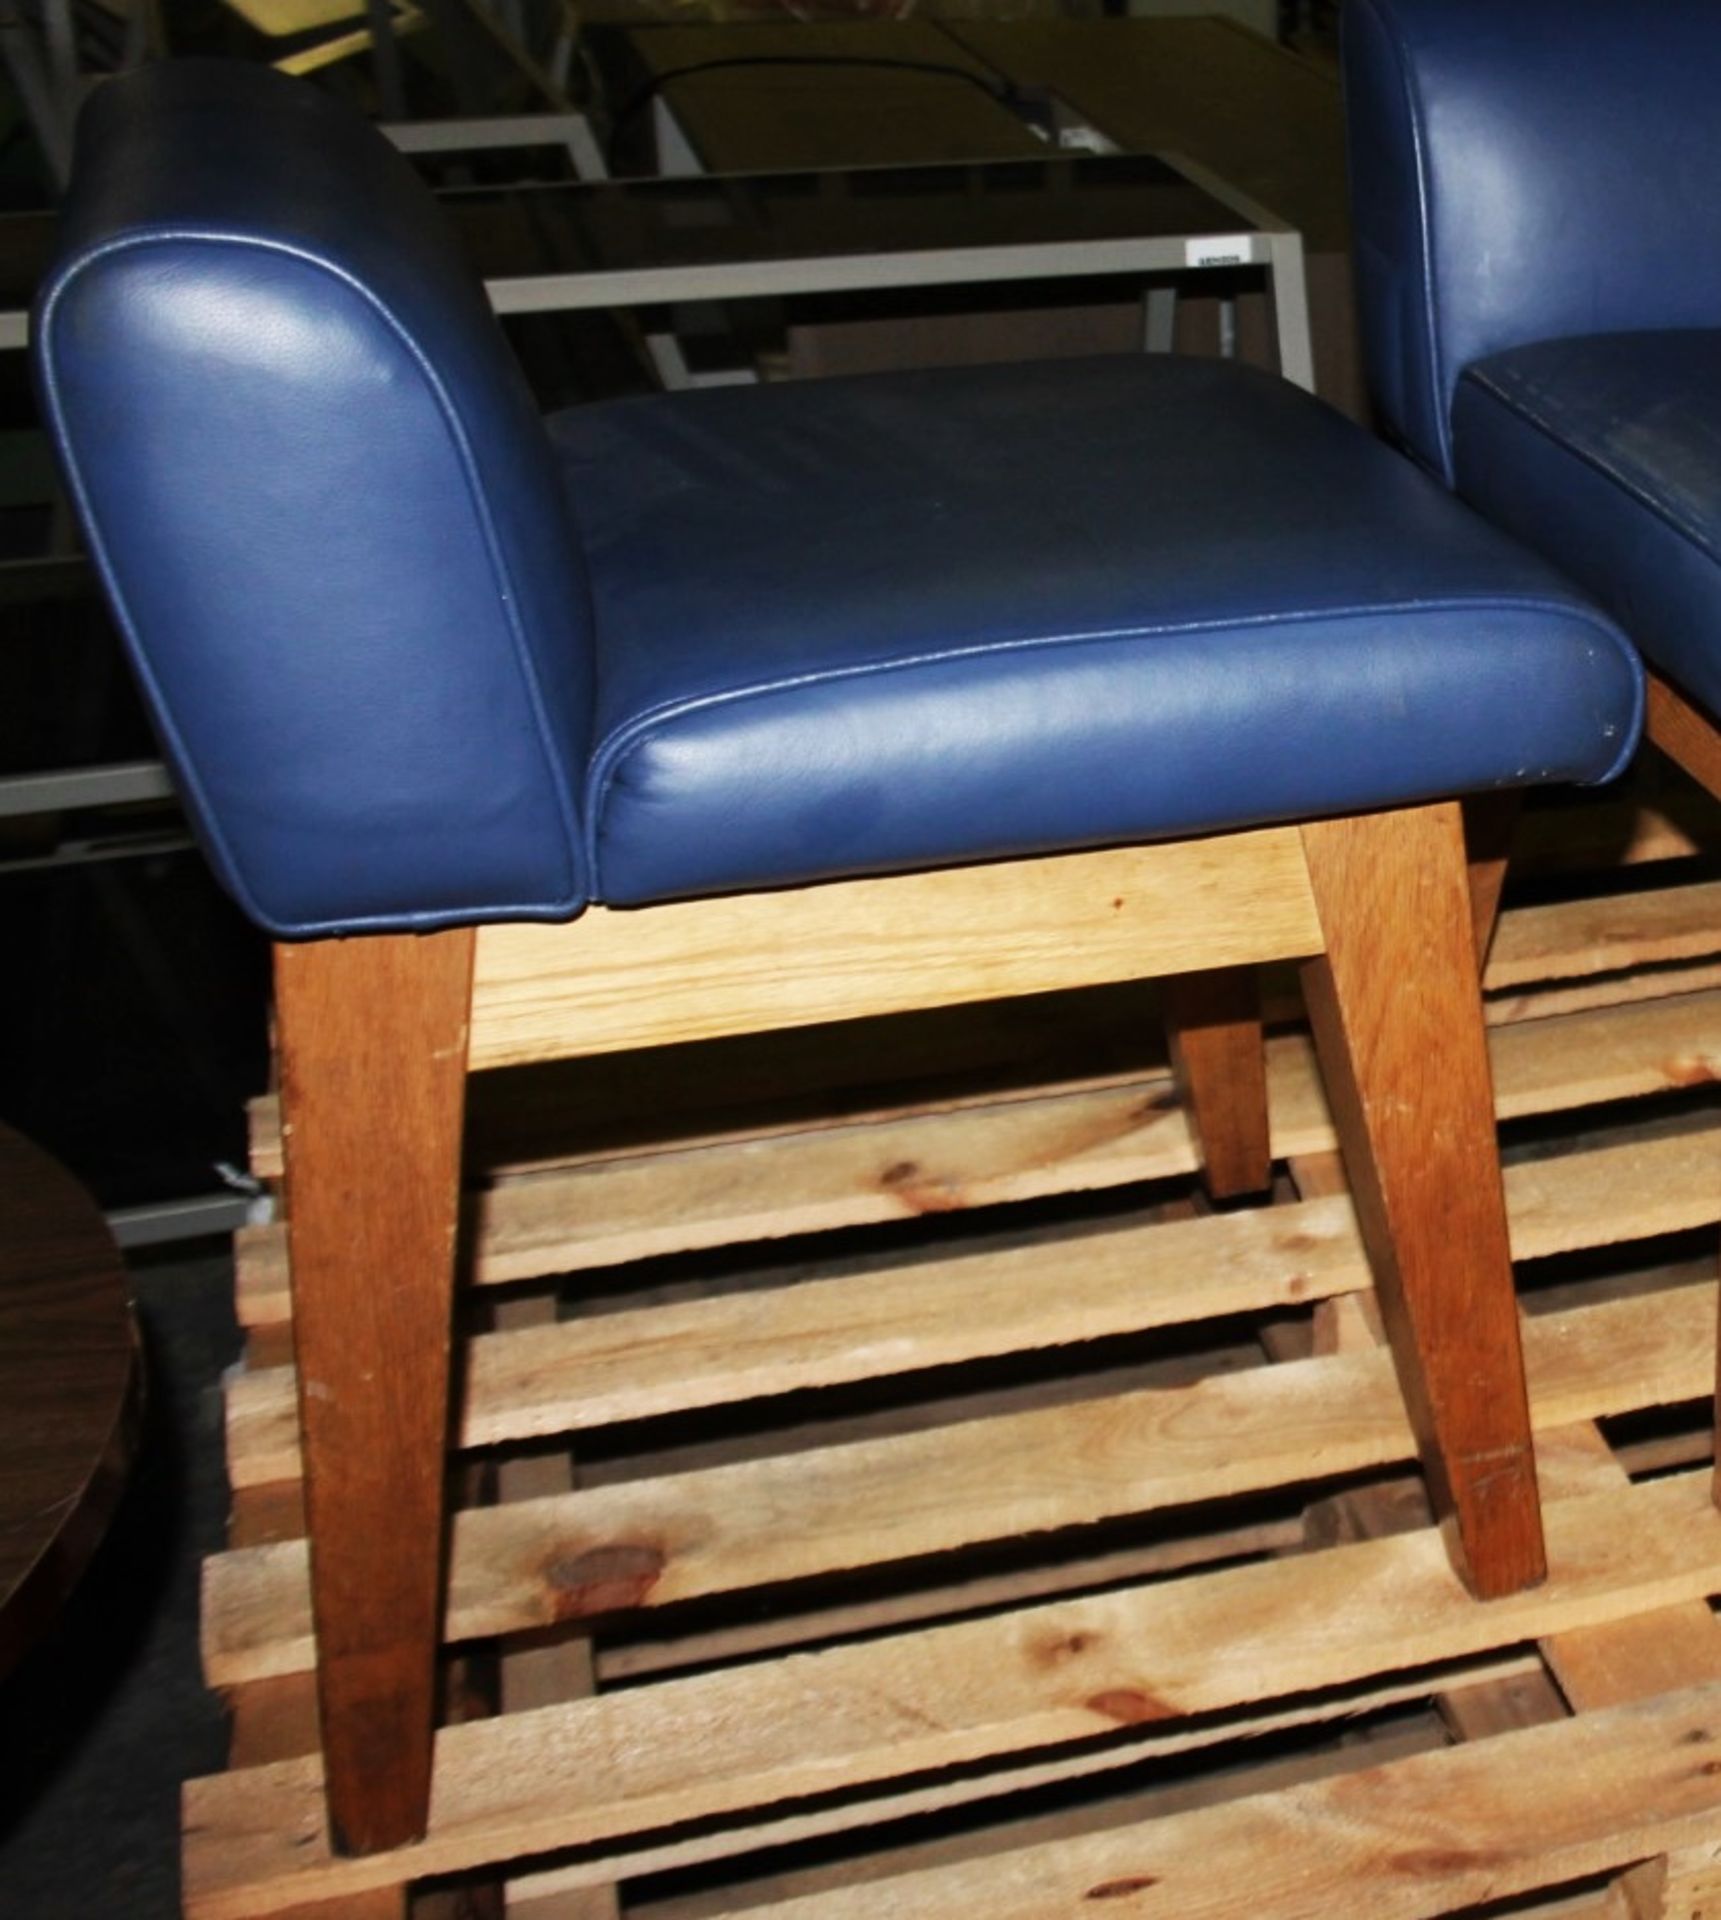 A Pair Of Stylish Low Back Restaurant Chairs With Bright Blue Faux Leather Upholstery - - Image 2 of 4